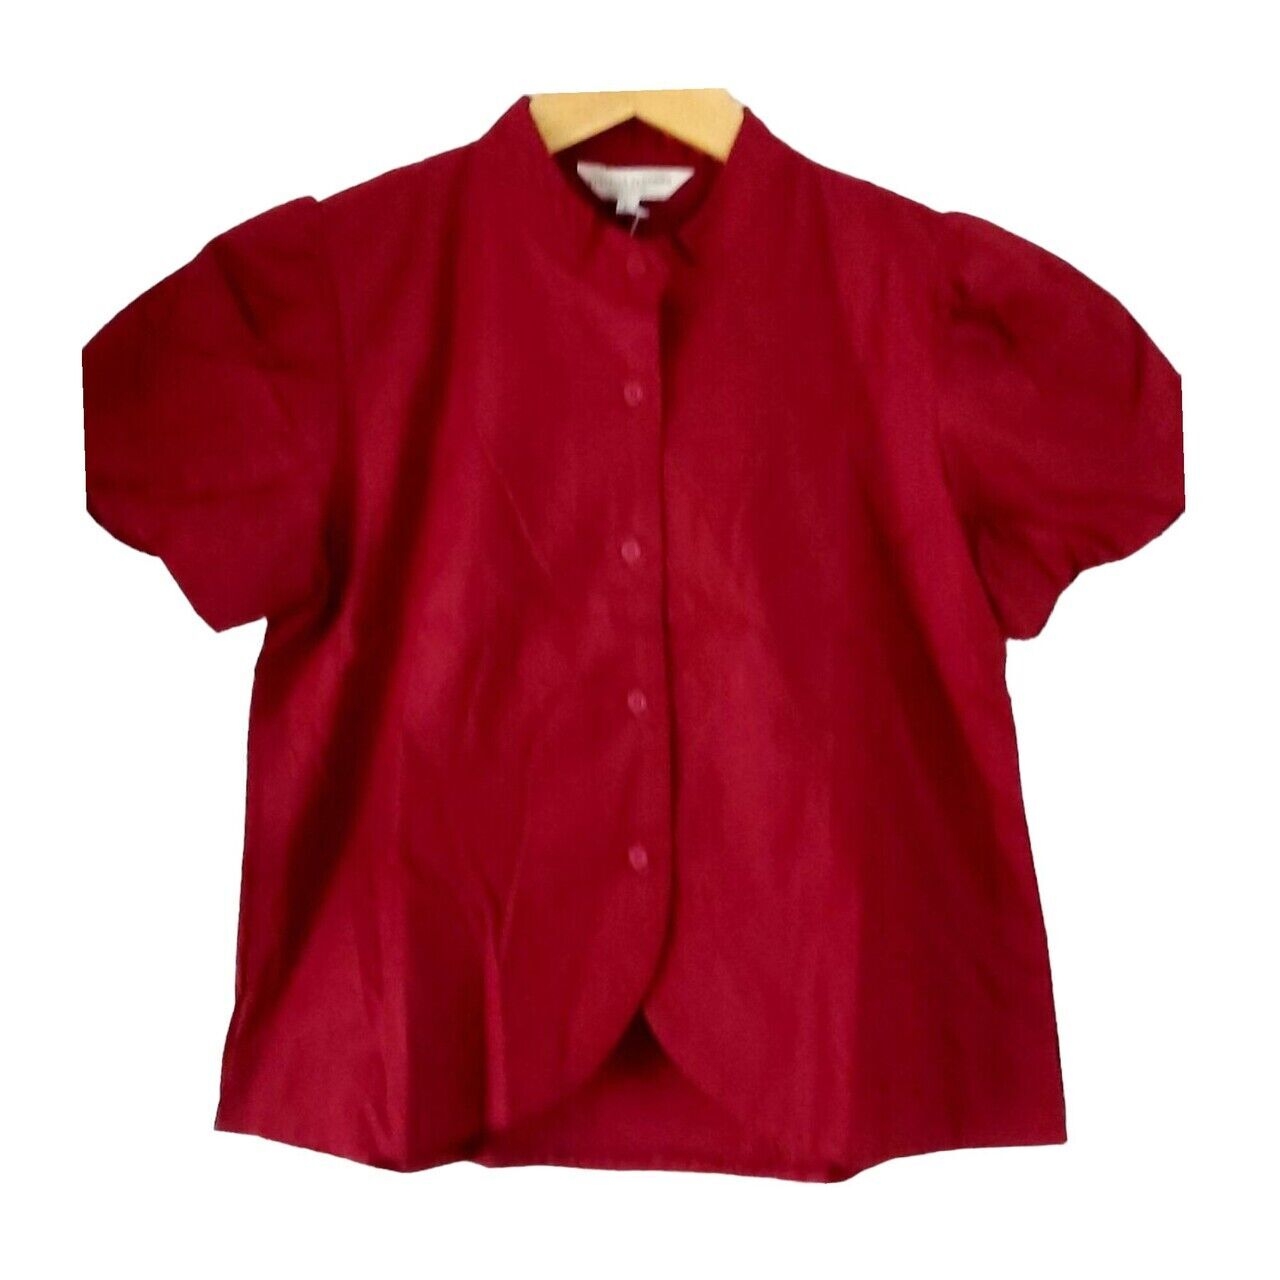 Beatrice Clothing Red Blouse